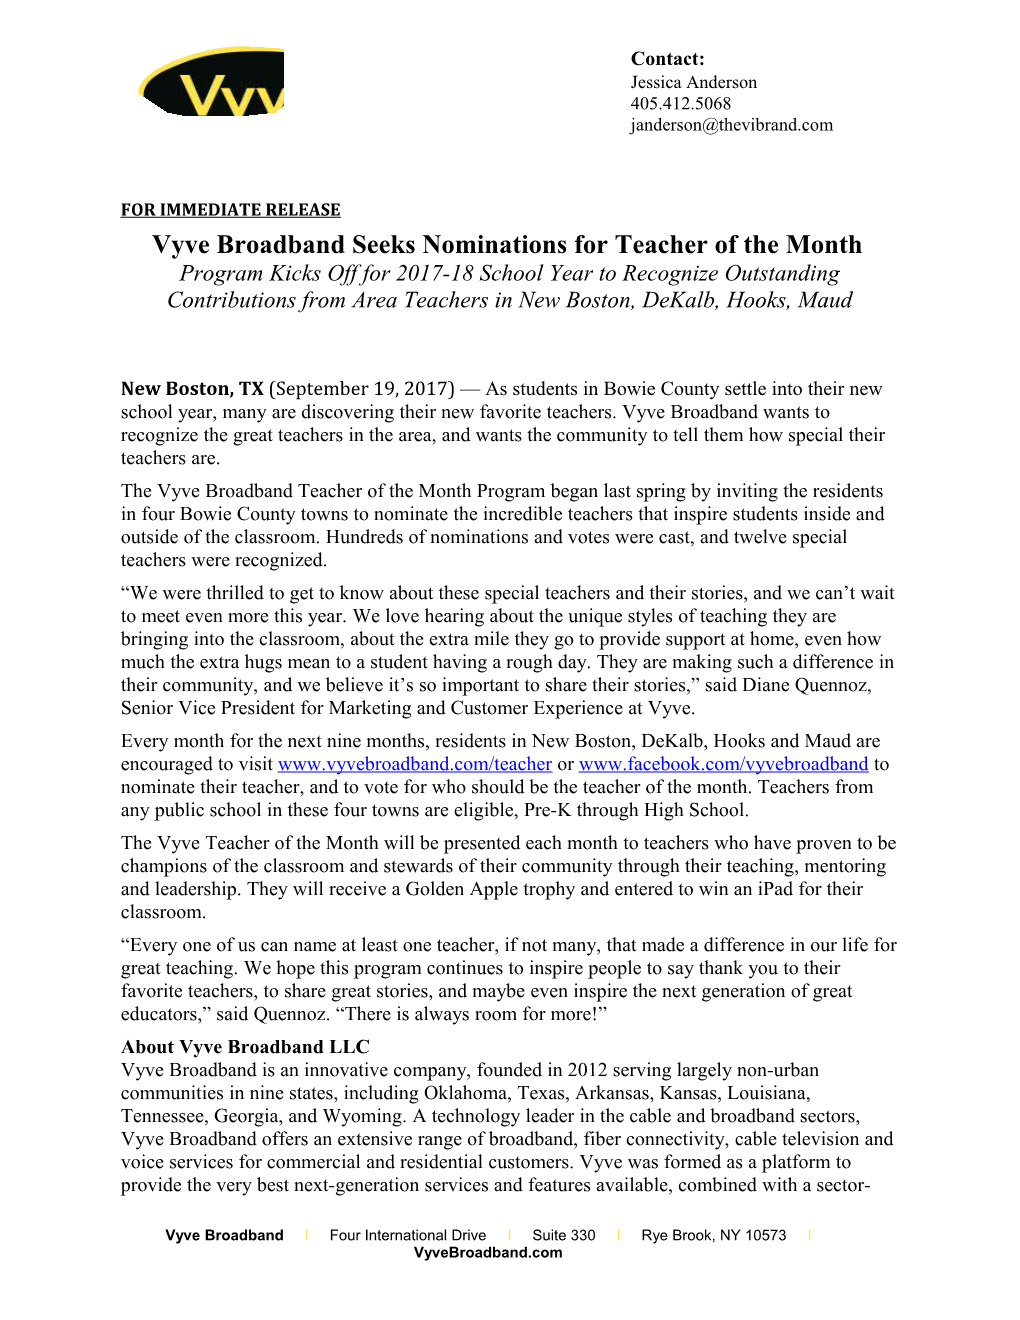 Vyvebroadband Seeks Nominations for Teacher of the Month